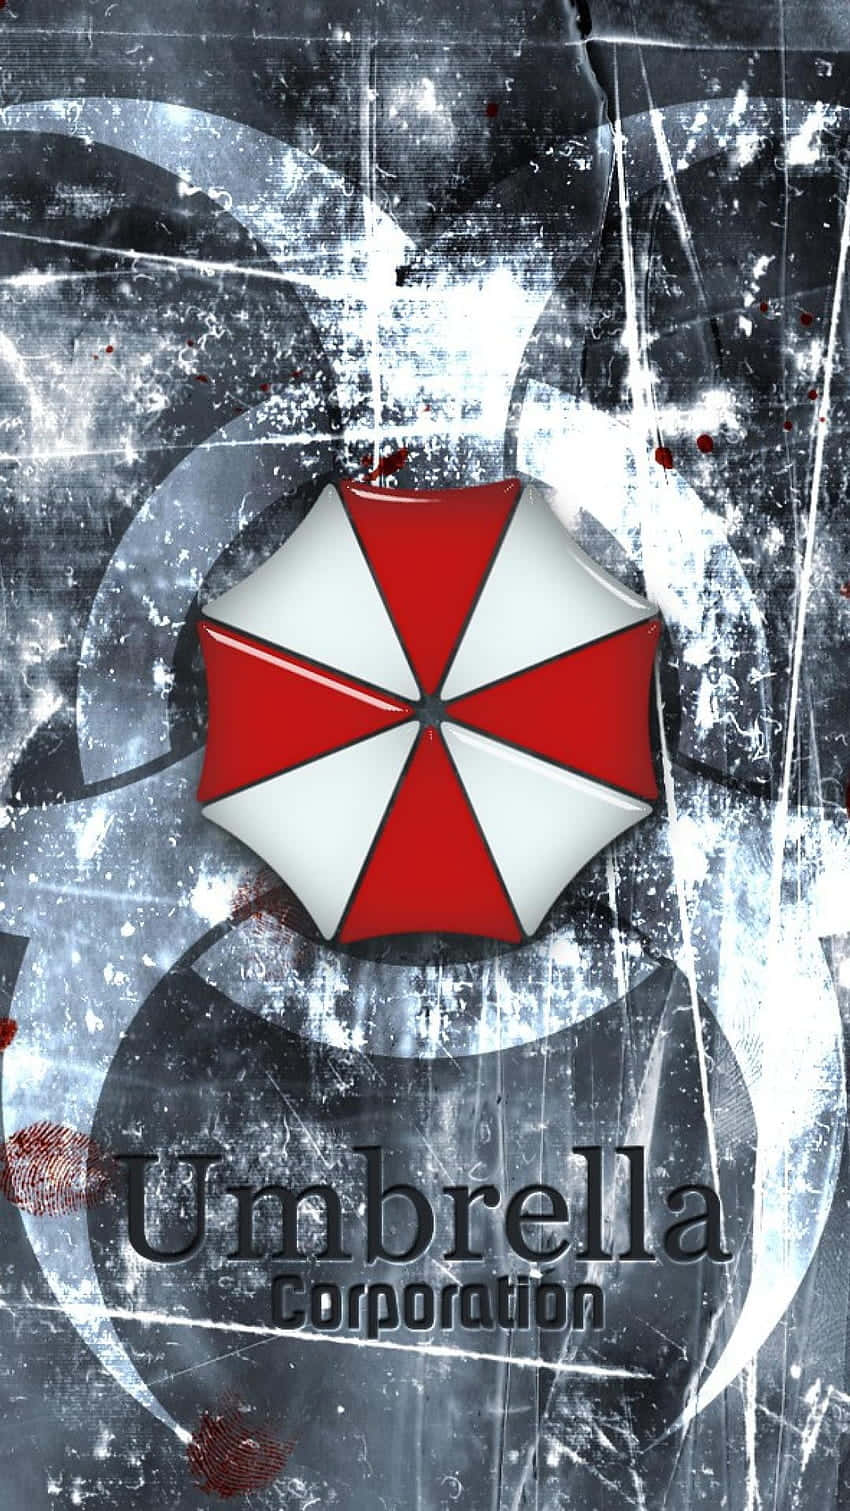 Download The Iconic Umbrella Corporation Logo, From Resident Evil